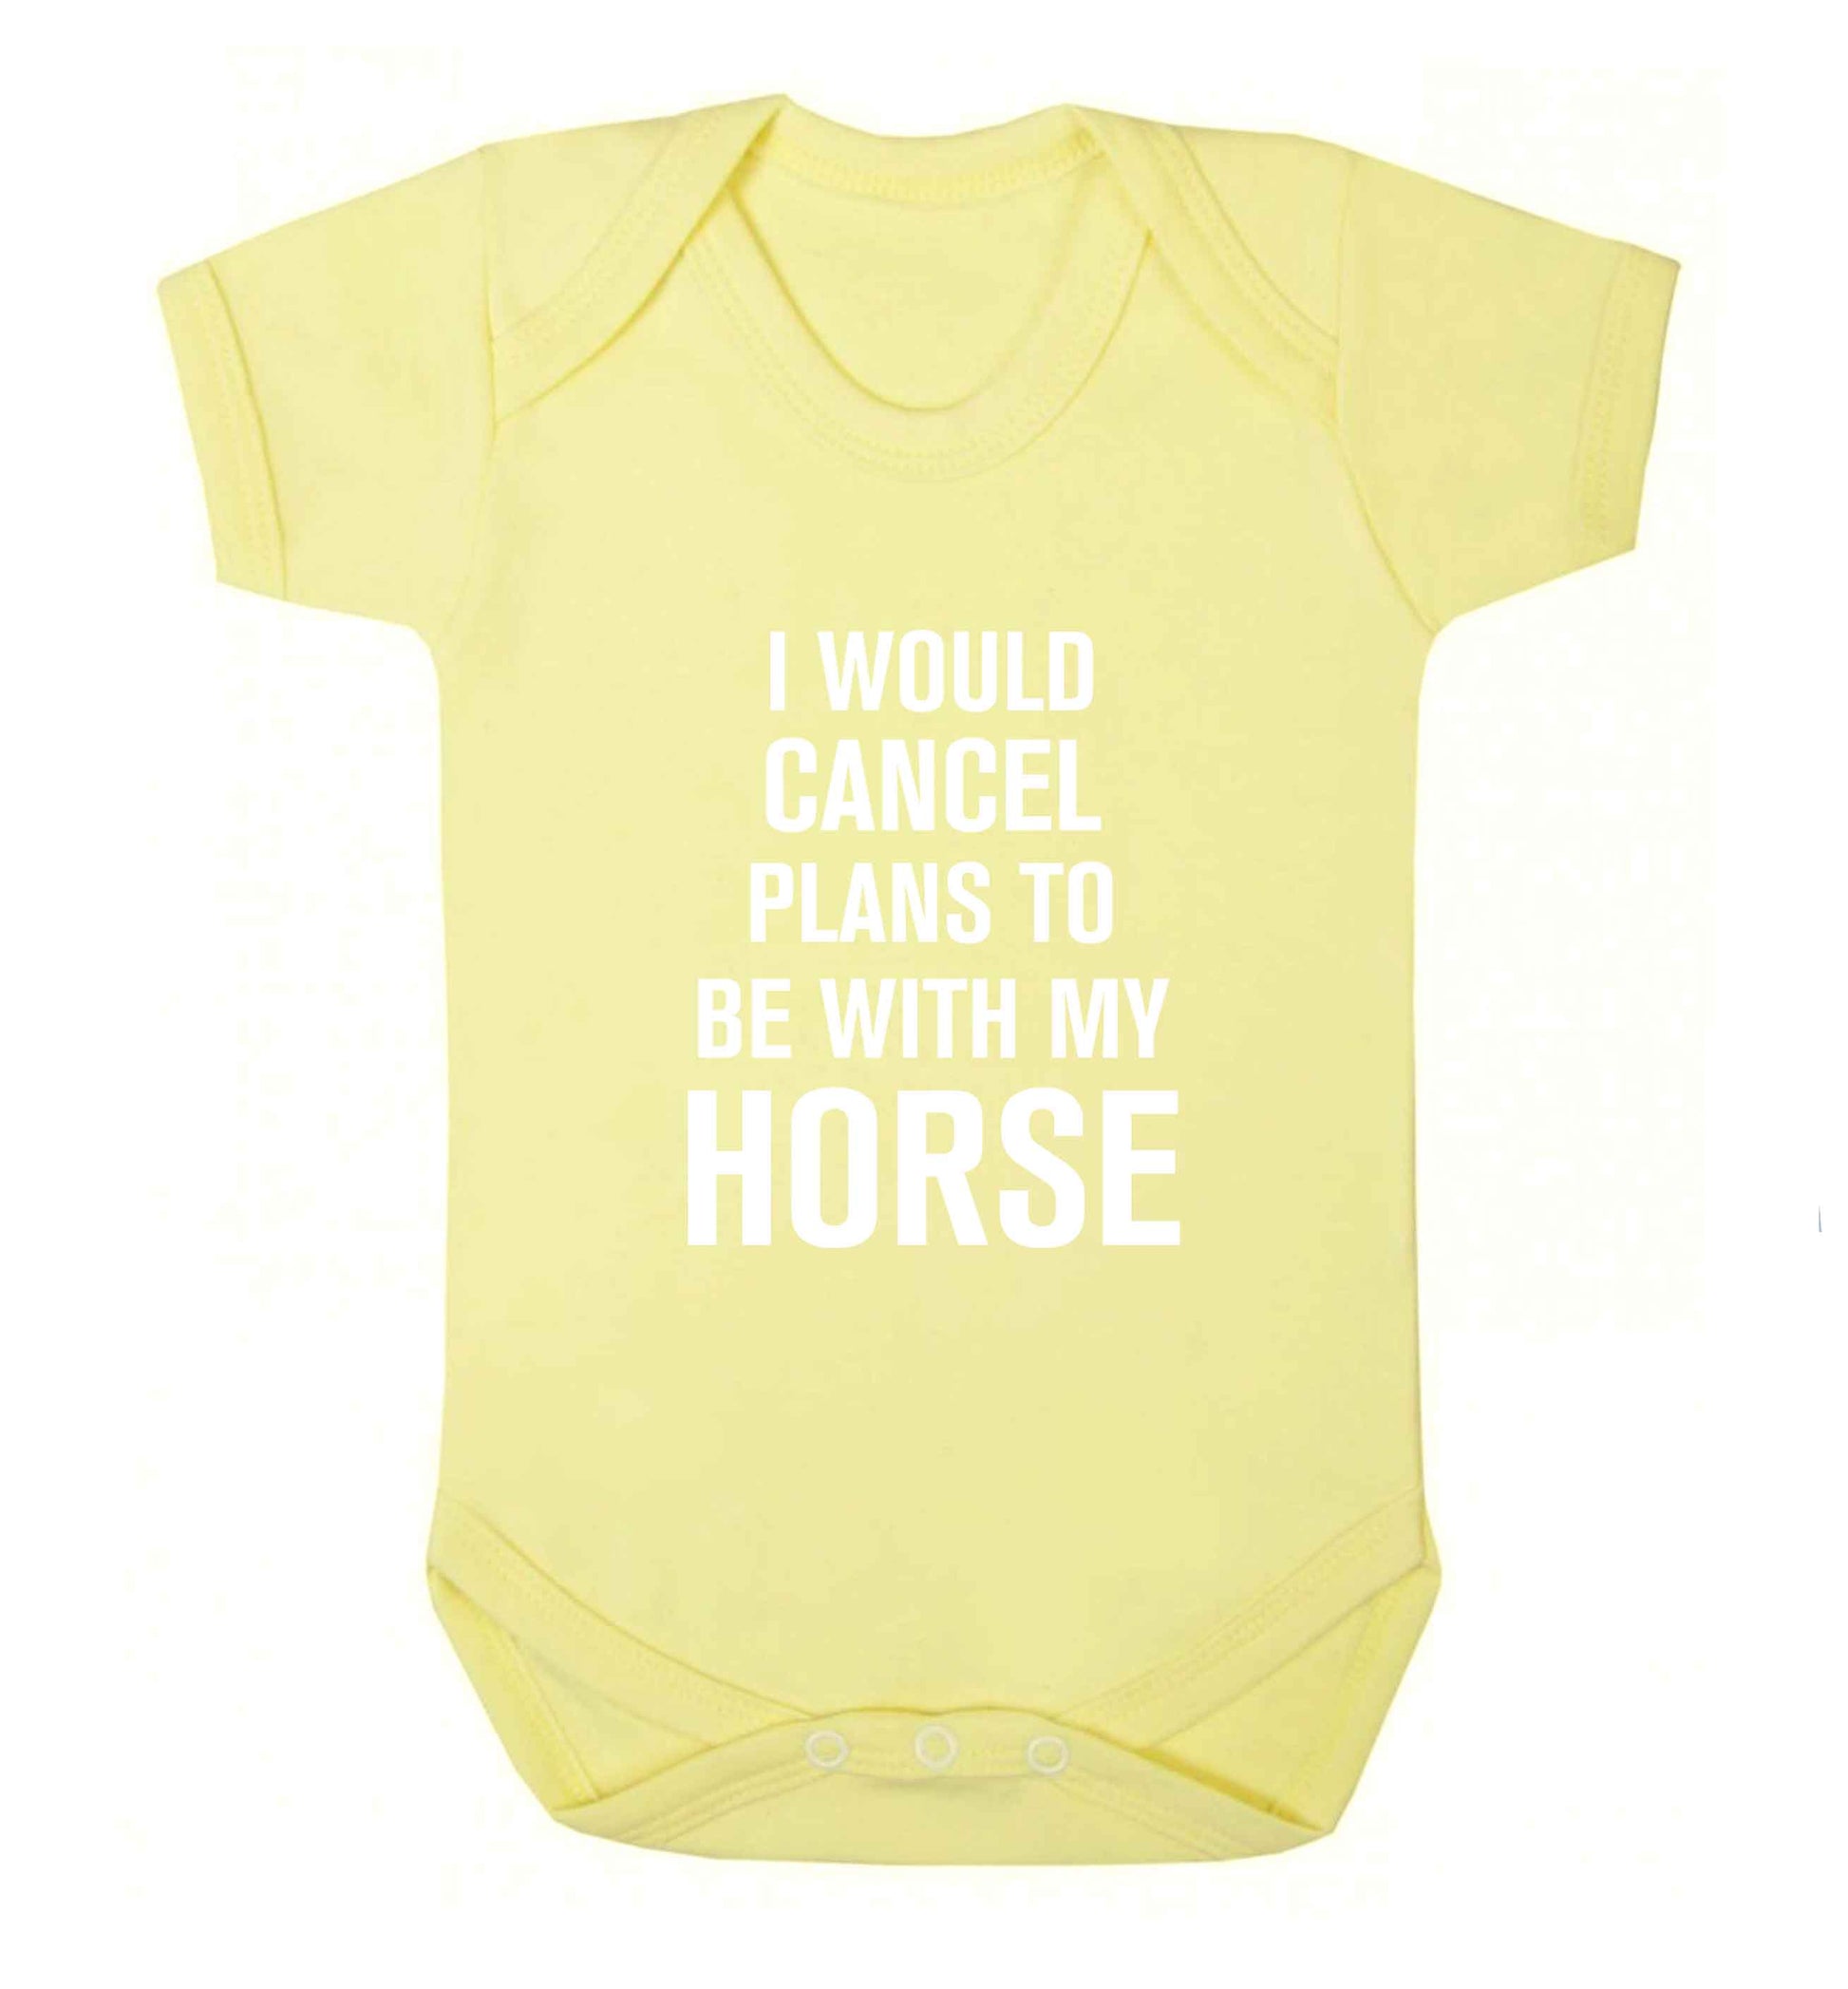 I will cancel plans to be with my horse baby vest pale yellow 18-24 months